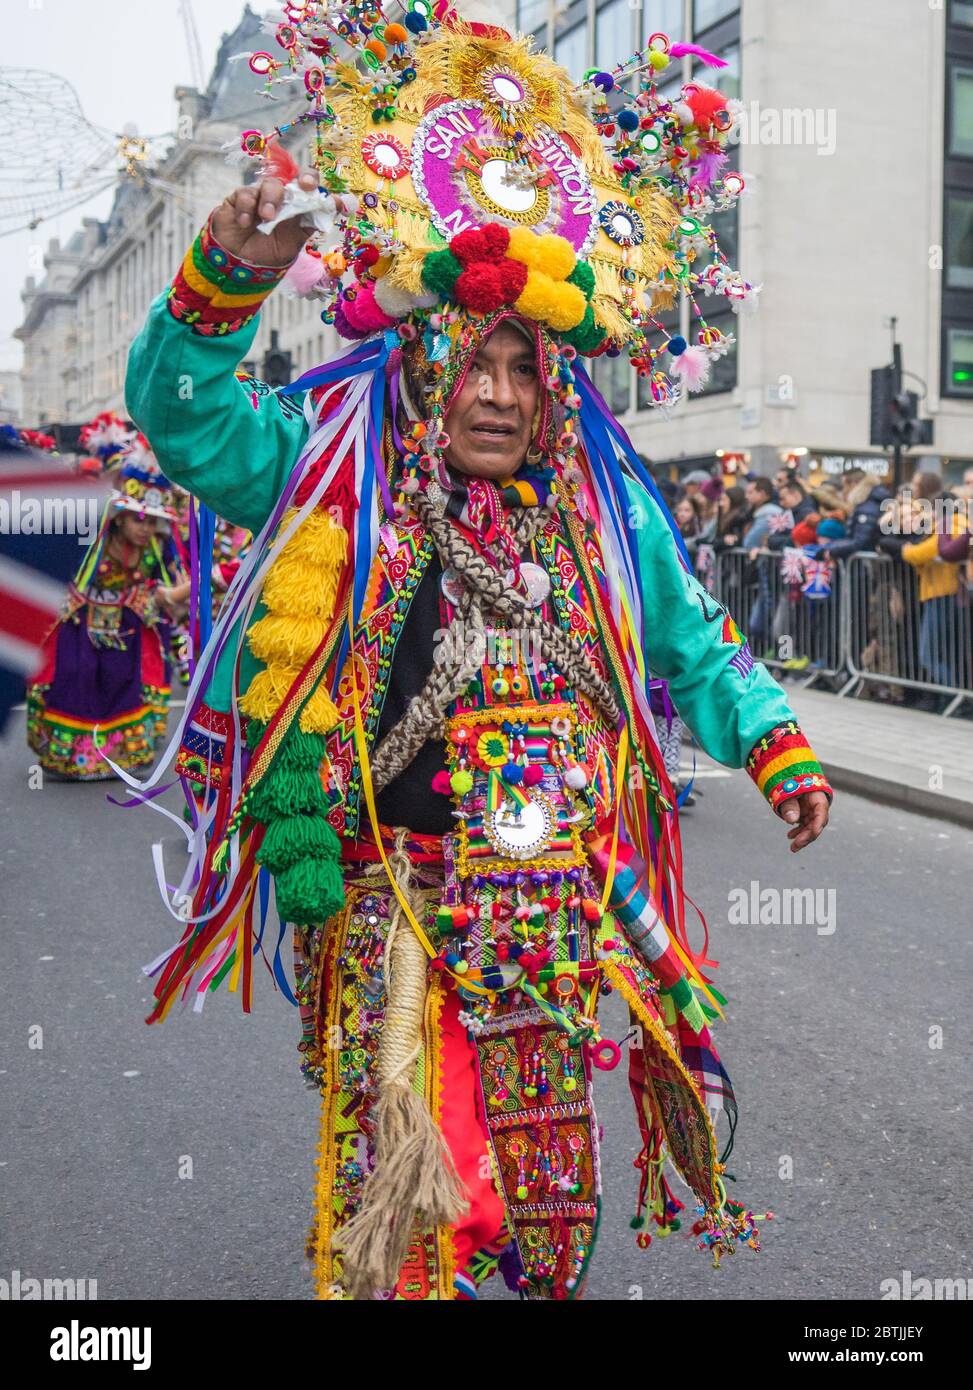 London New Year's Day Parade 2020, Man in colorful costume. Stock Photo